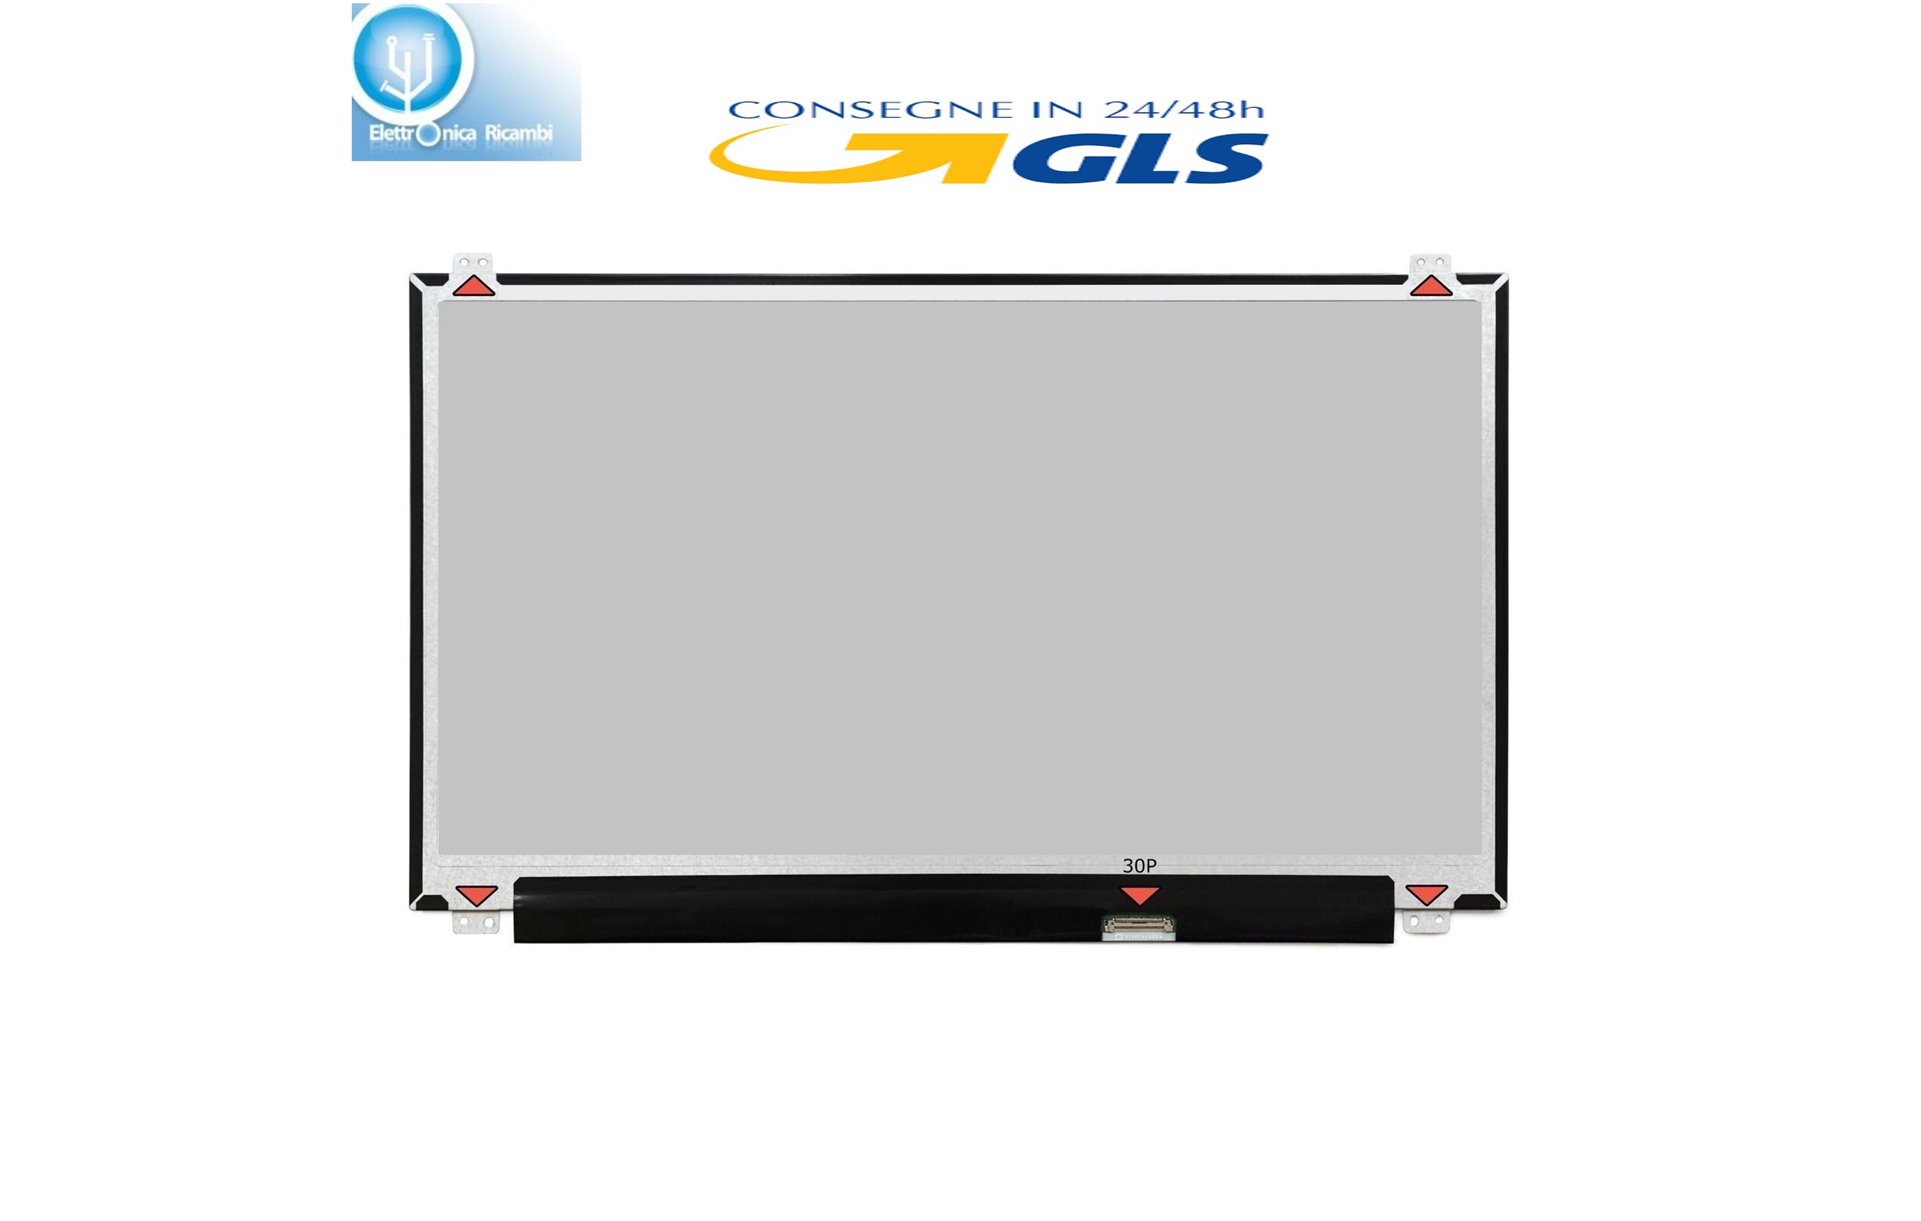 DISPLAY LCD PACKARDBELL EASYNOTE TE70BH SERIES 15.6 1366x768 LED 30 pin